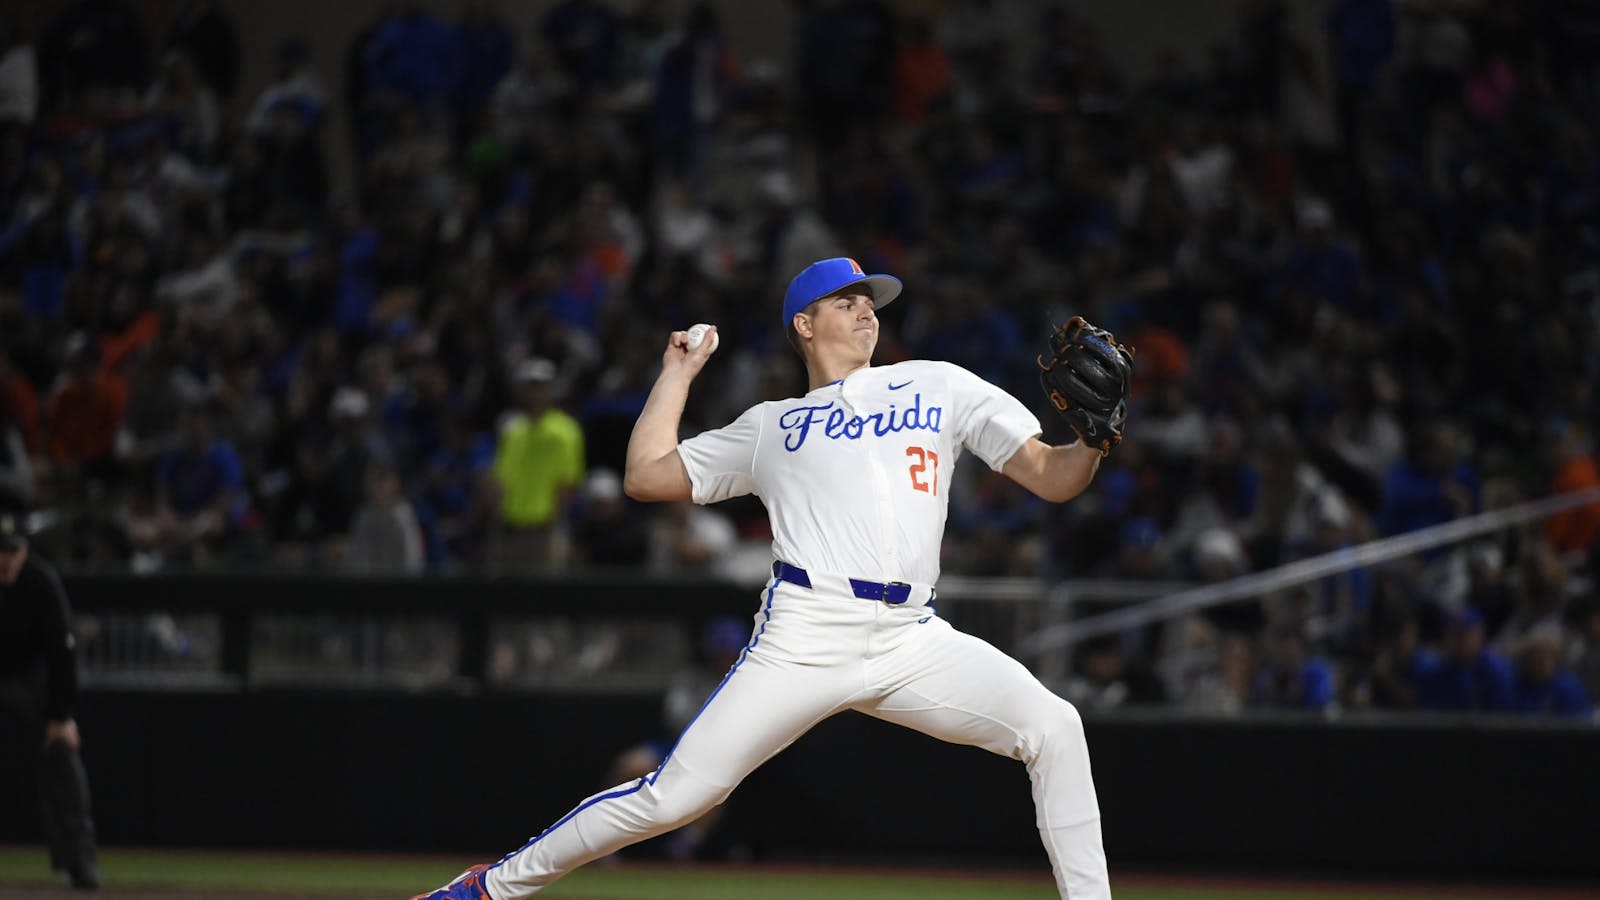 Florida grinds out midweek victory over South Florida - The Independent Florida Alligator